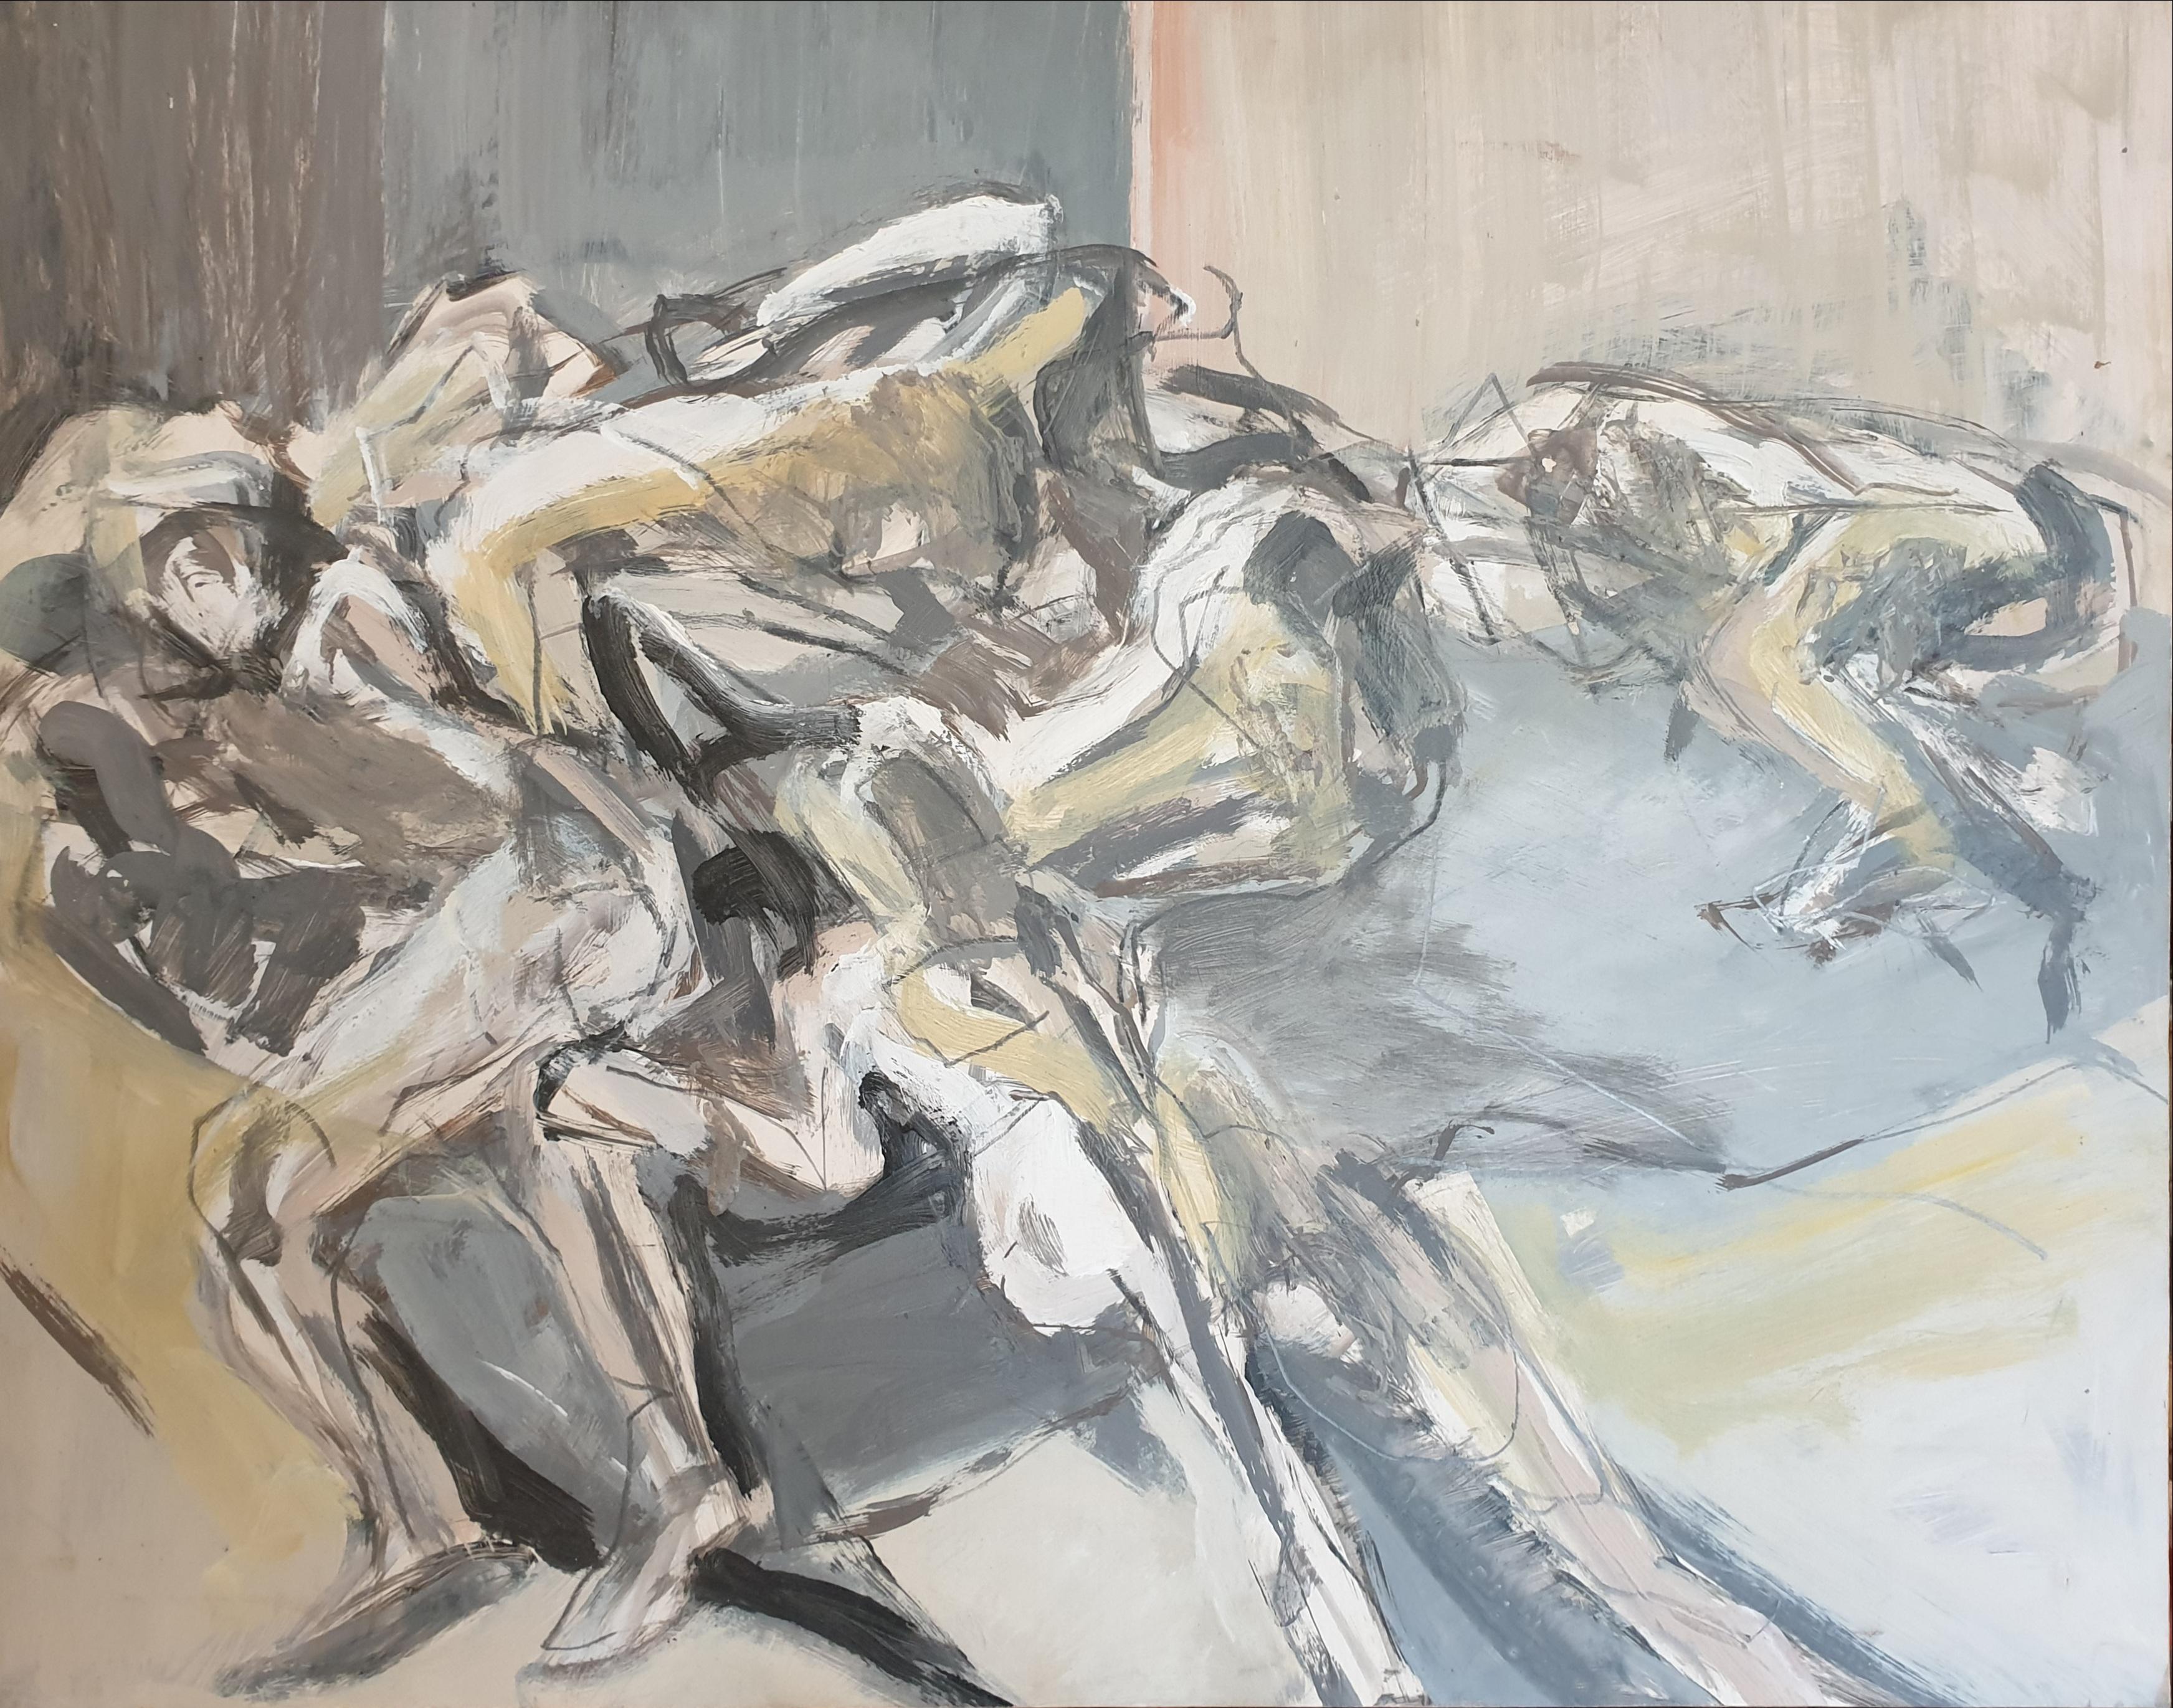 Chantal Payet Figurative Painting - 'Assemblées', Figures In Motion, Oil on Paper on Board.